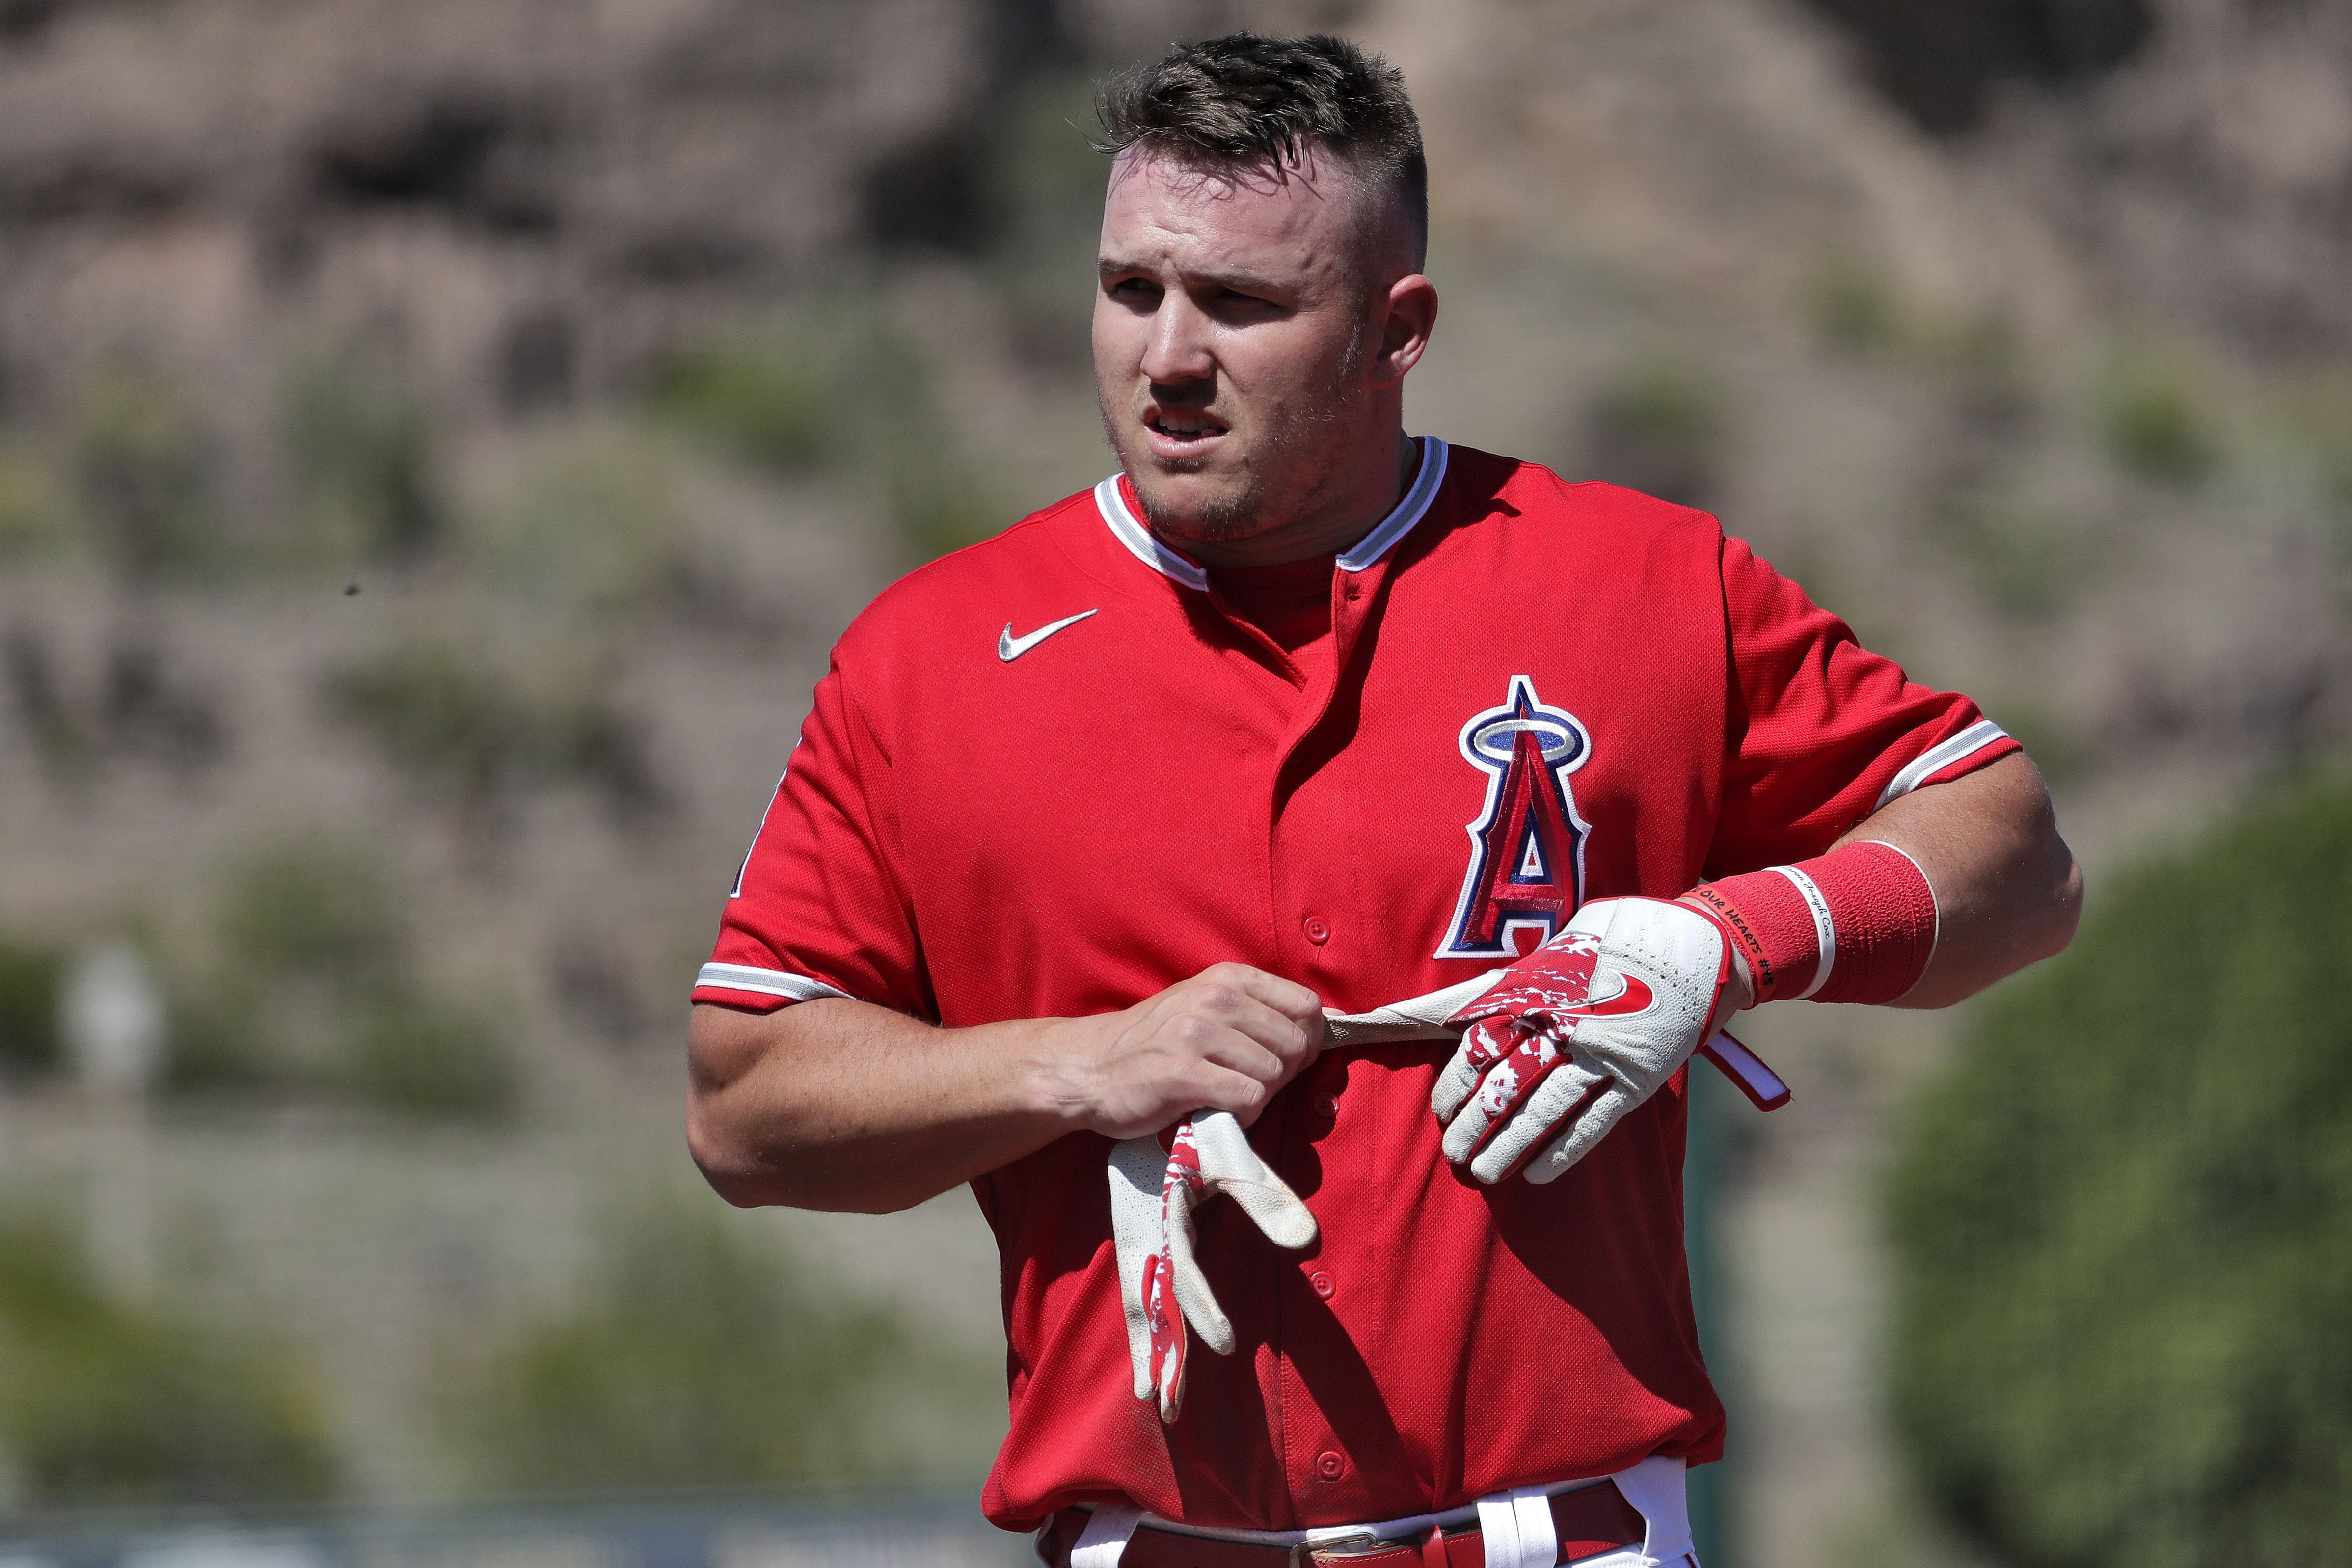 Mike Trout to return to Angels on Tuesday after baby's birth - The